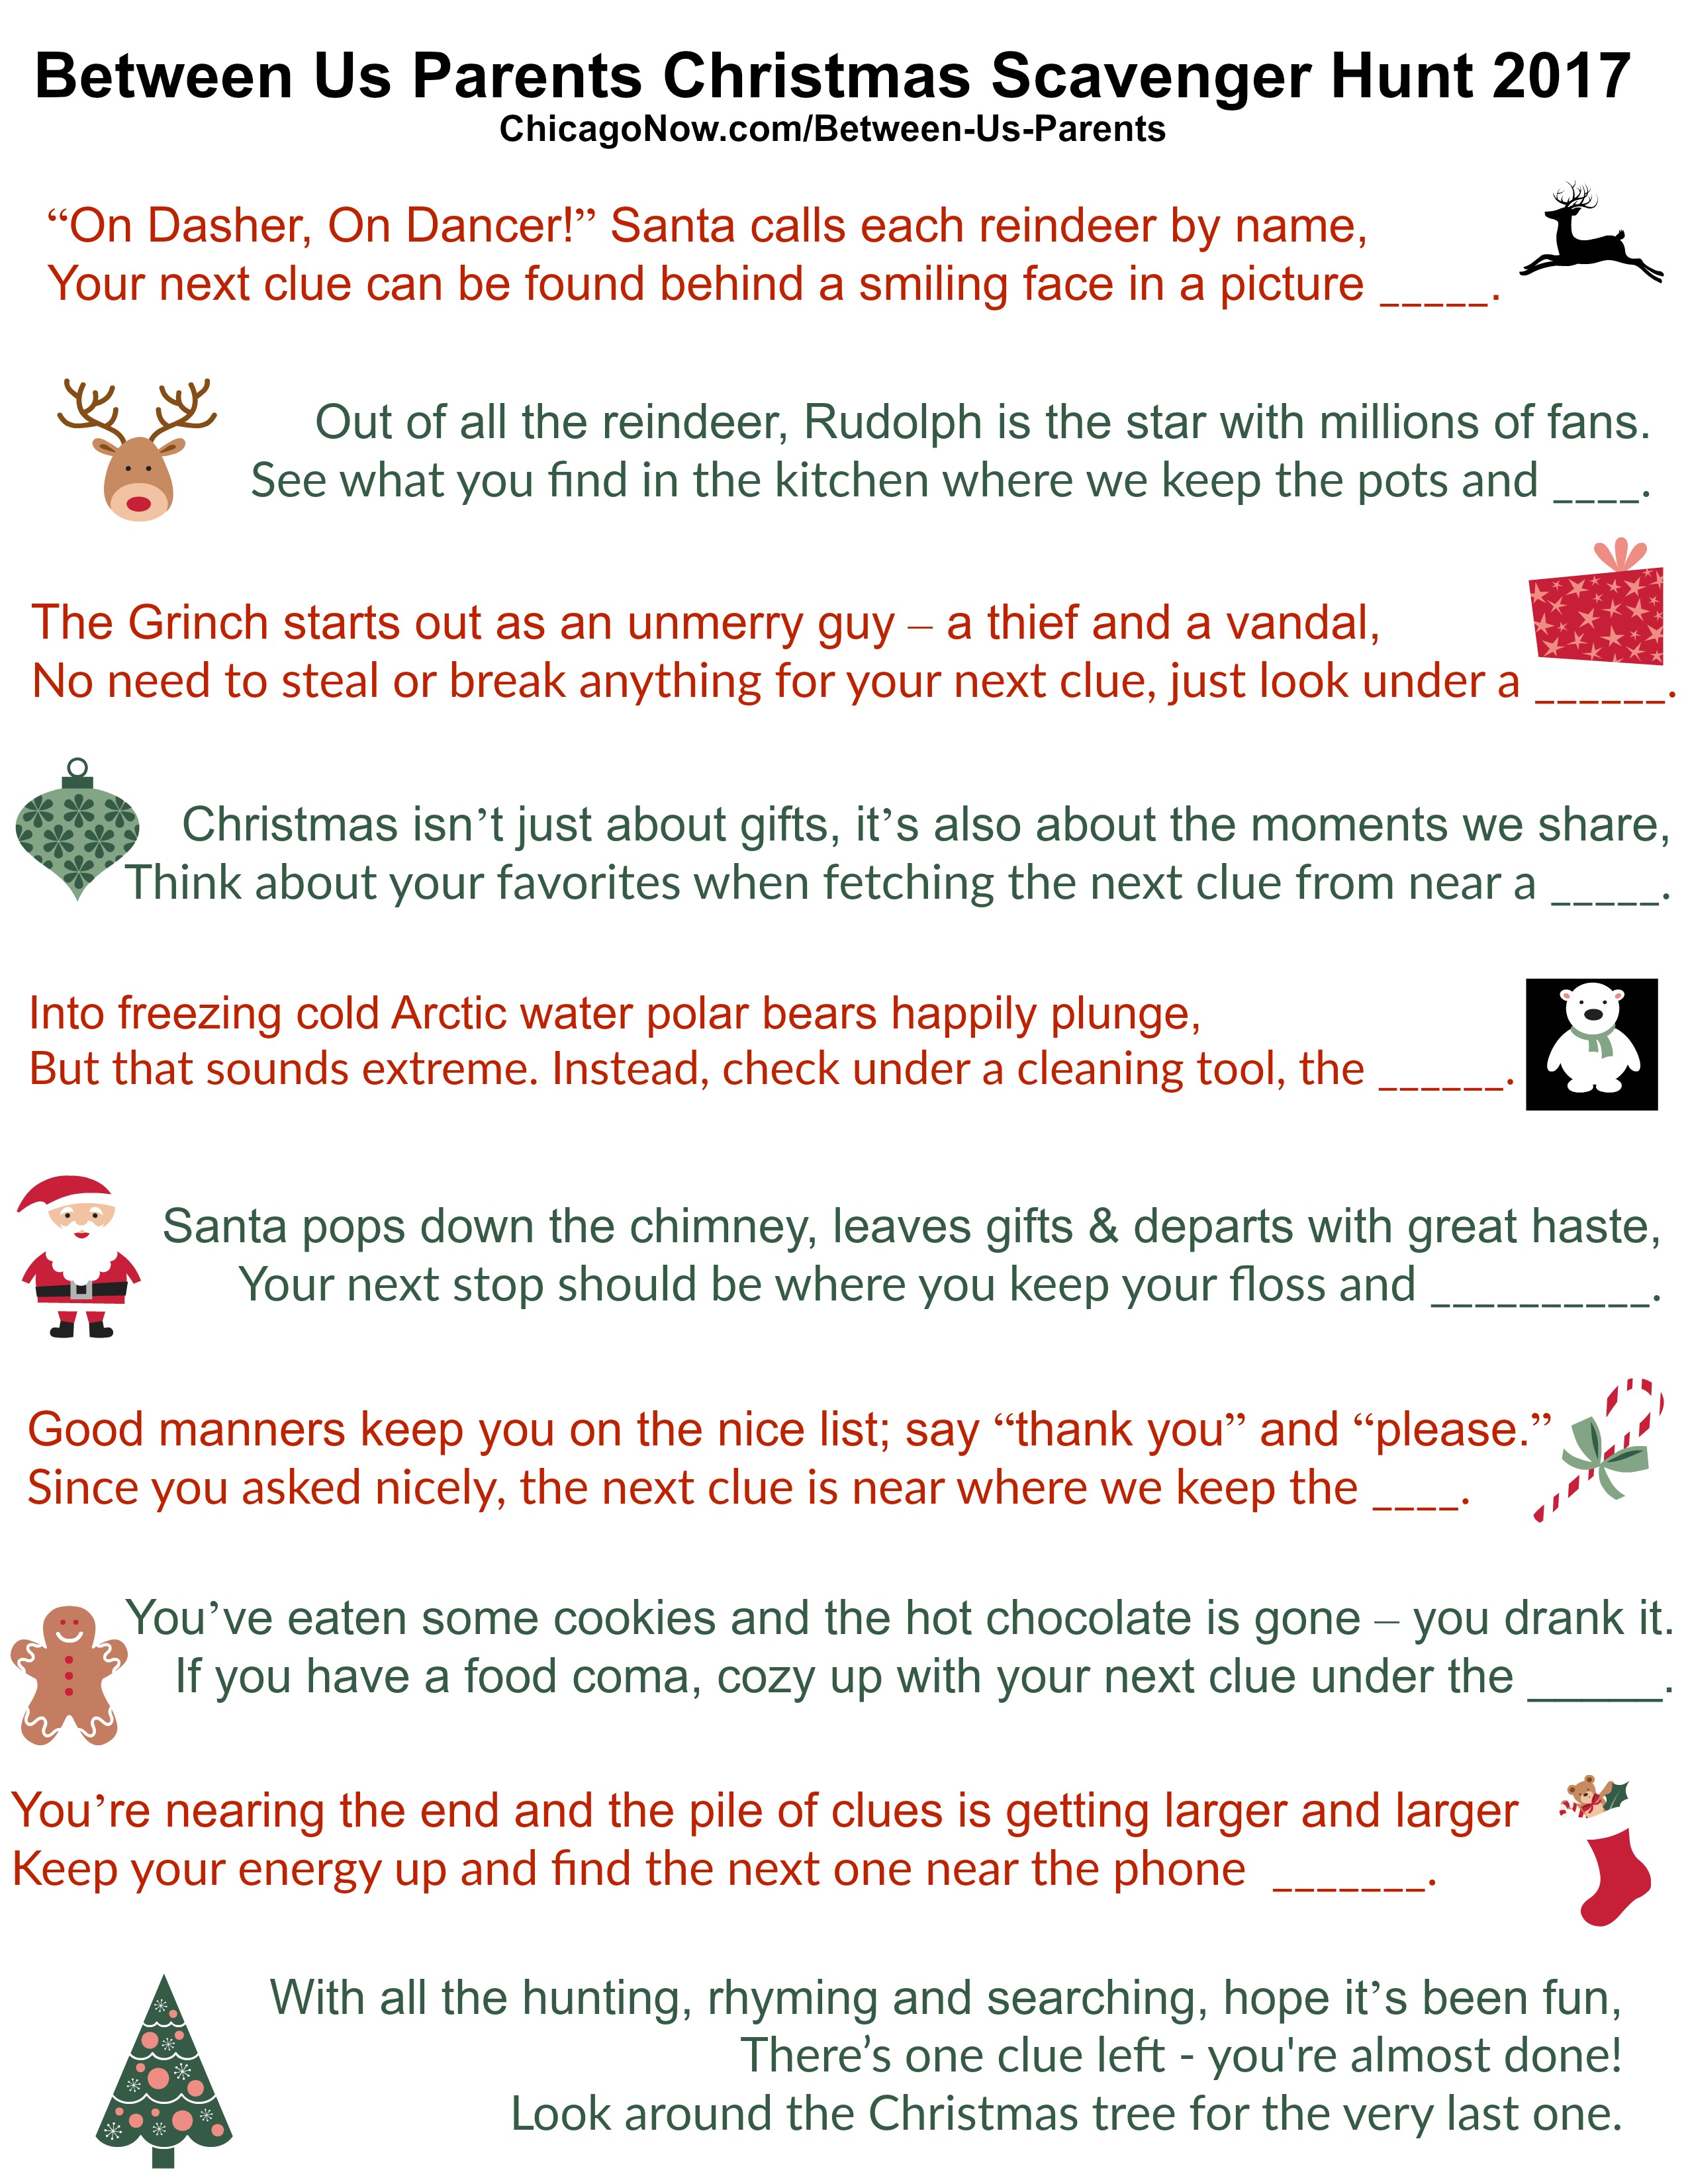 Printable Christmas scavenger hunt clues for gift-finding fun, 2017 ...